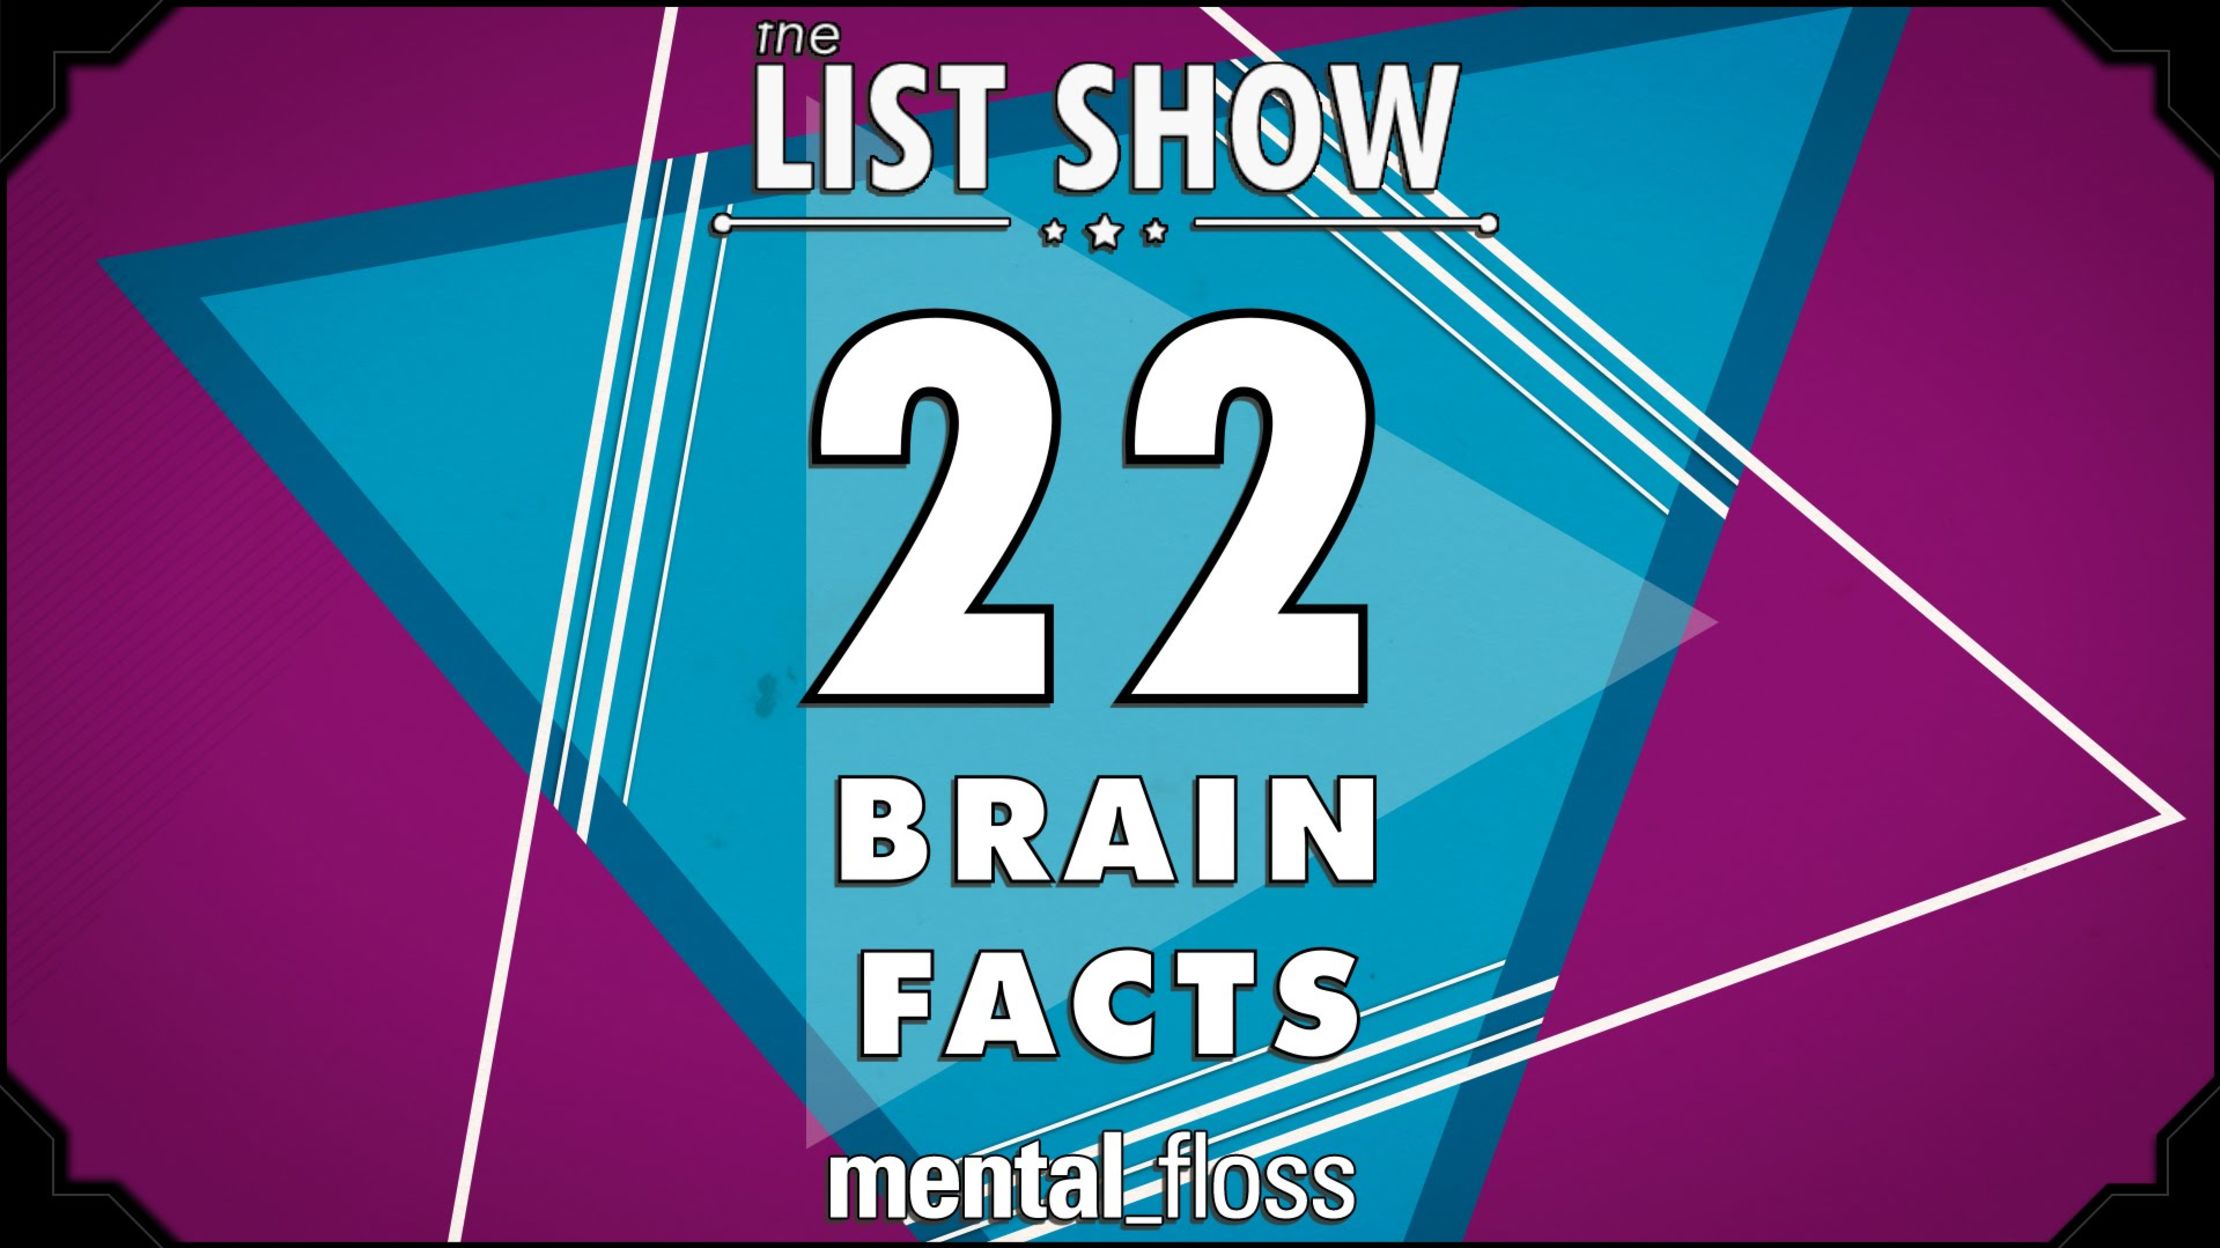 22 Brainy Facts for Brain Week! Mental Floss